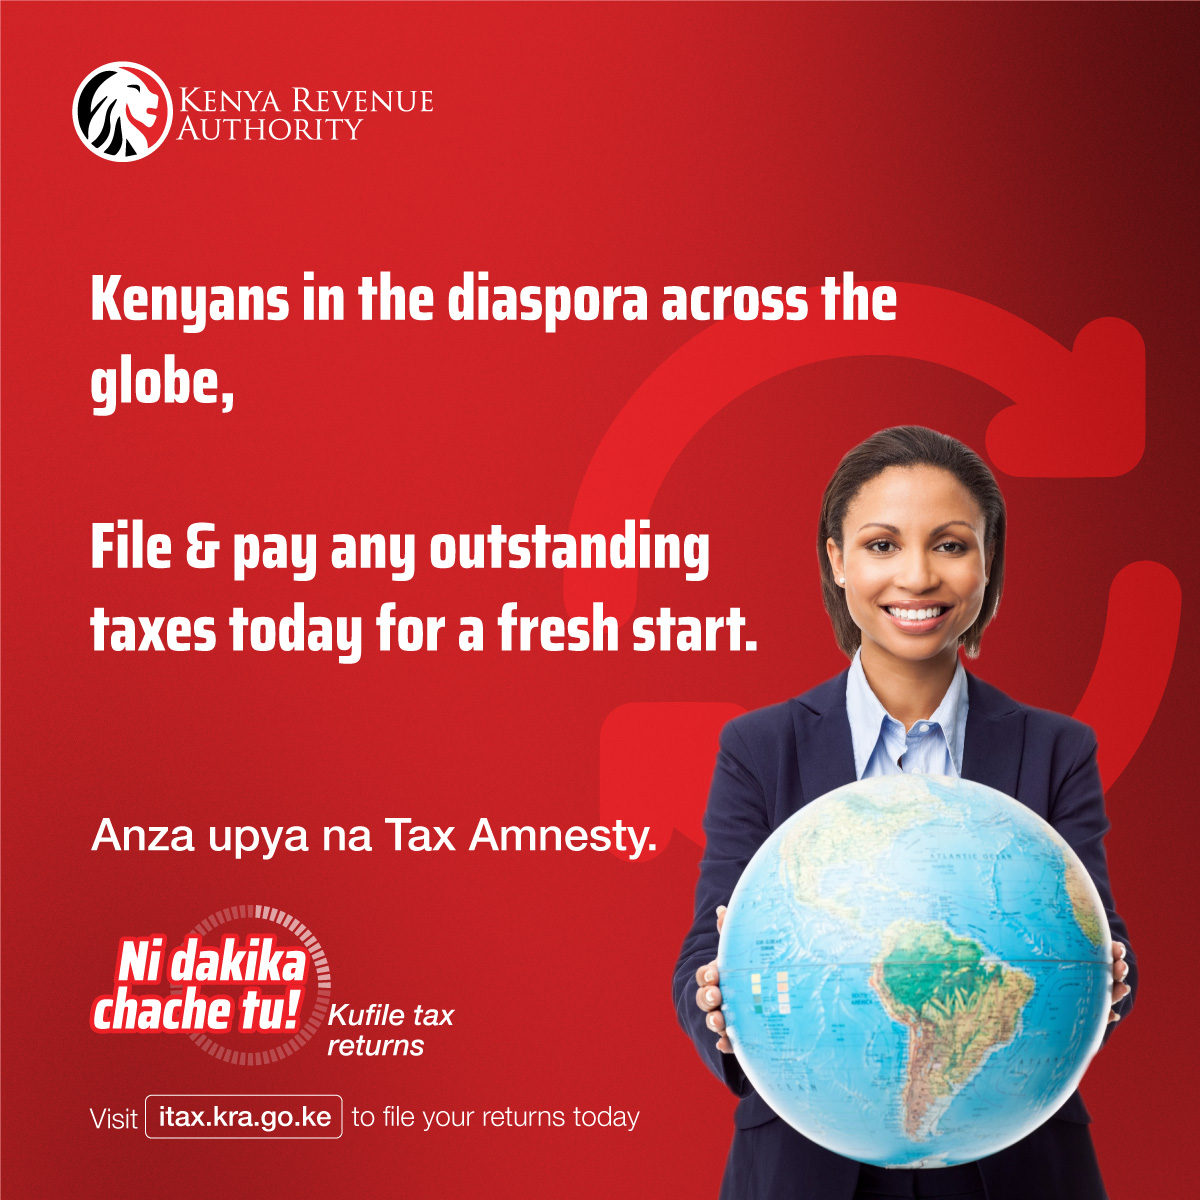 Jambo Kenyans in the diaspora.👋 We are offering 100% tax amnesty on interest and penalties for tax debts accumulated up to 31st December 2022. Settle any outstanding taxes today to take advantage of this unique opportunity. Ni dakika chache tu!👌 bit.ly/3F53A60